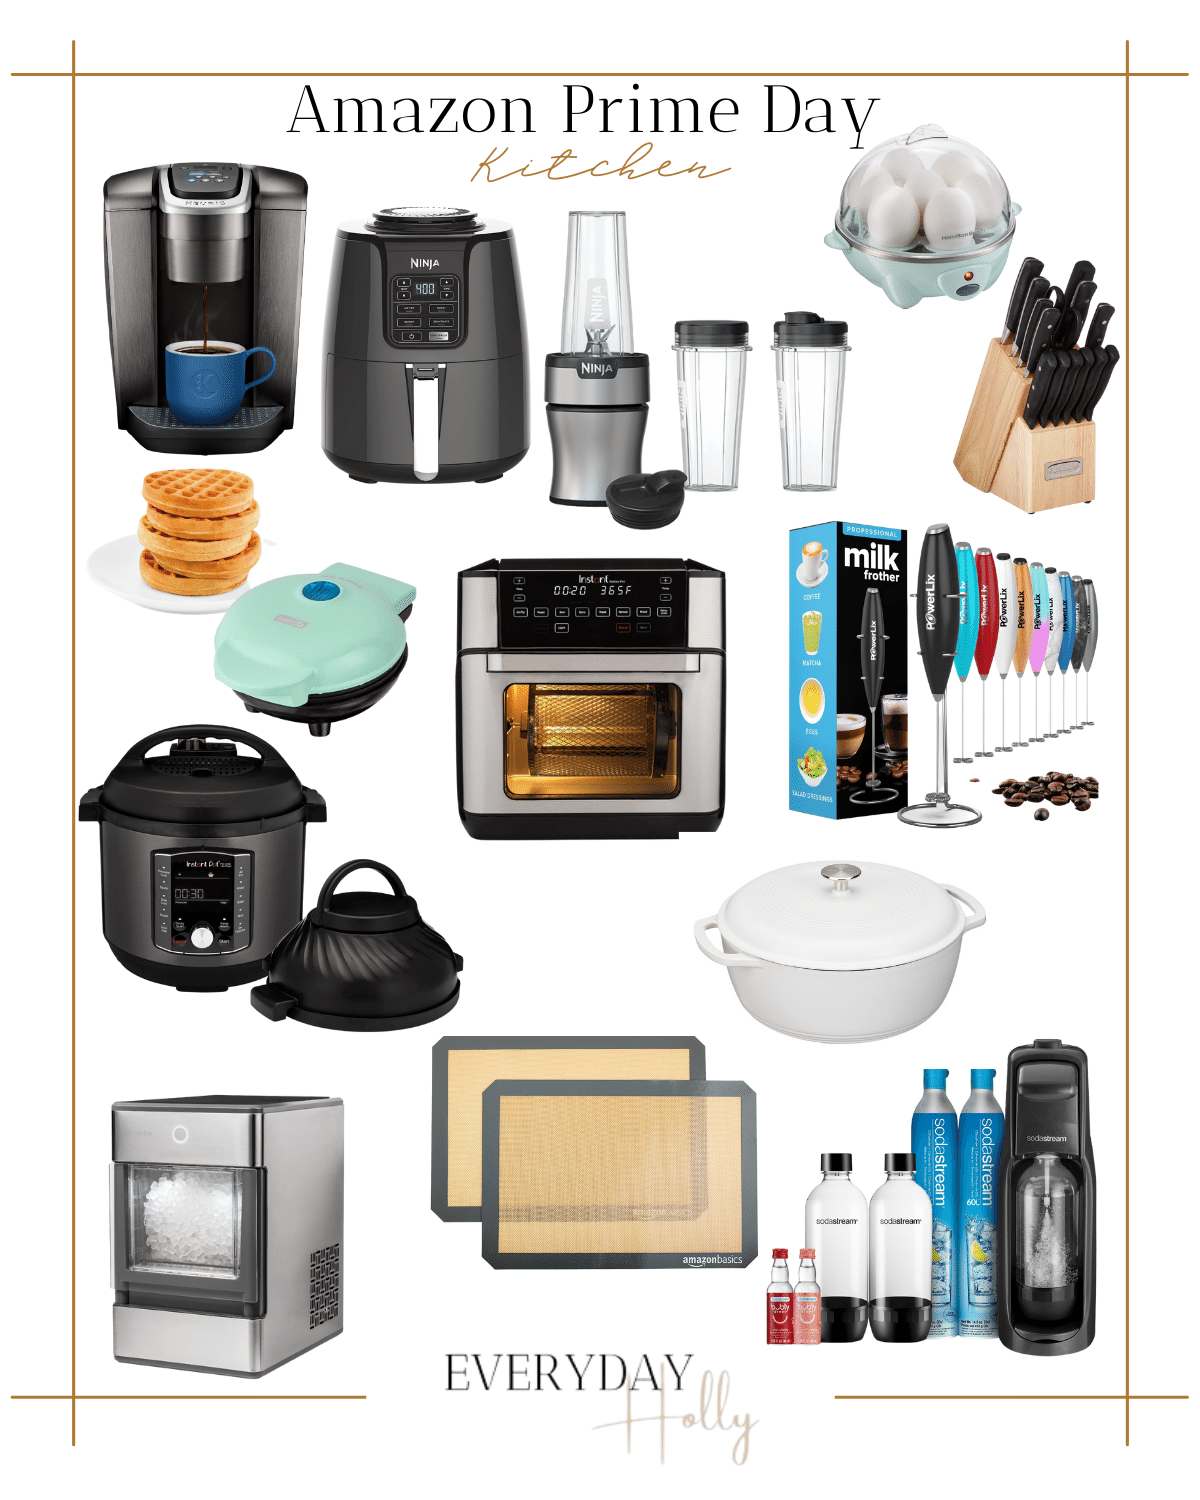 amazon kitchen items, keurig coffee machine, ninja air fryer, blenders, egg cooker, knife set, waffle amker, convection oven, milk frother, instant pot, dutch oven cast iron, ice machine, food mats, sparkling water machine 